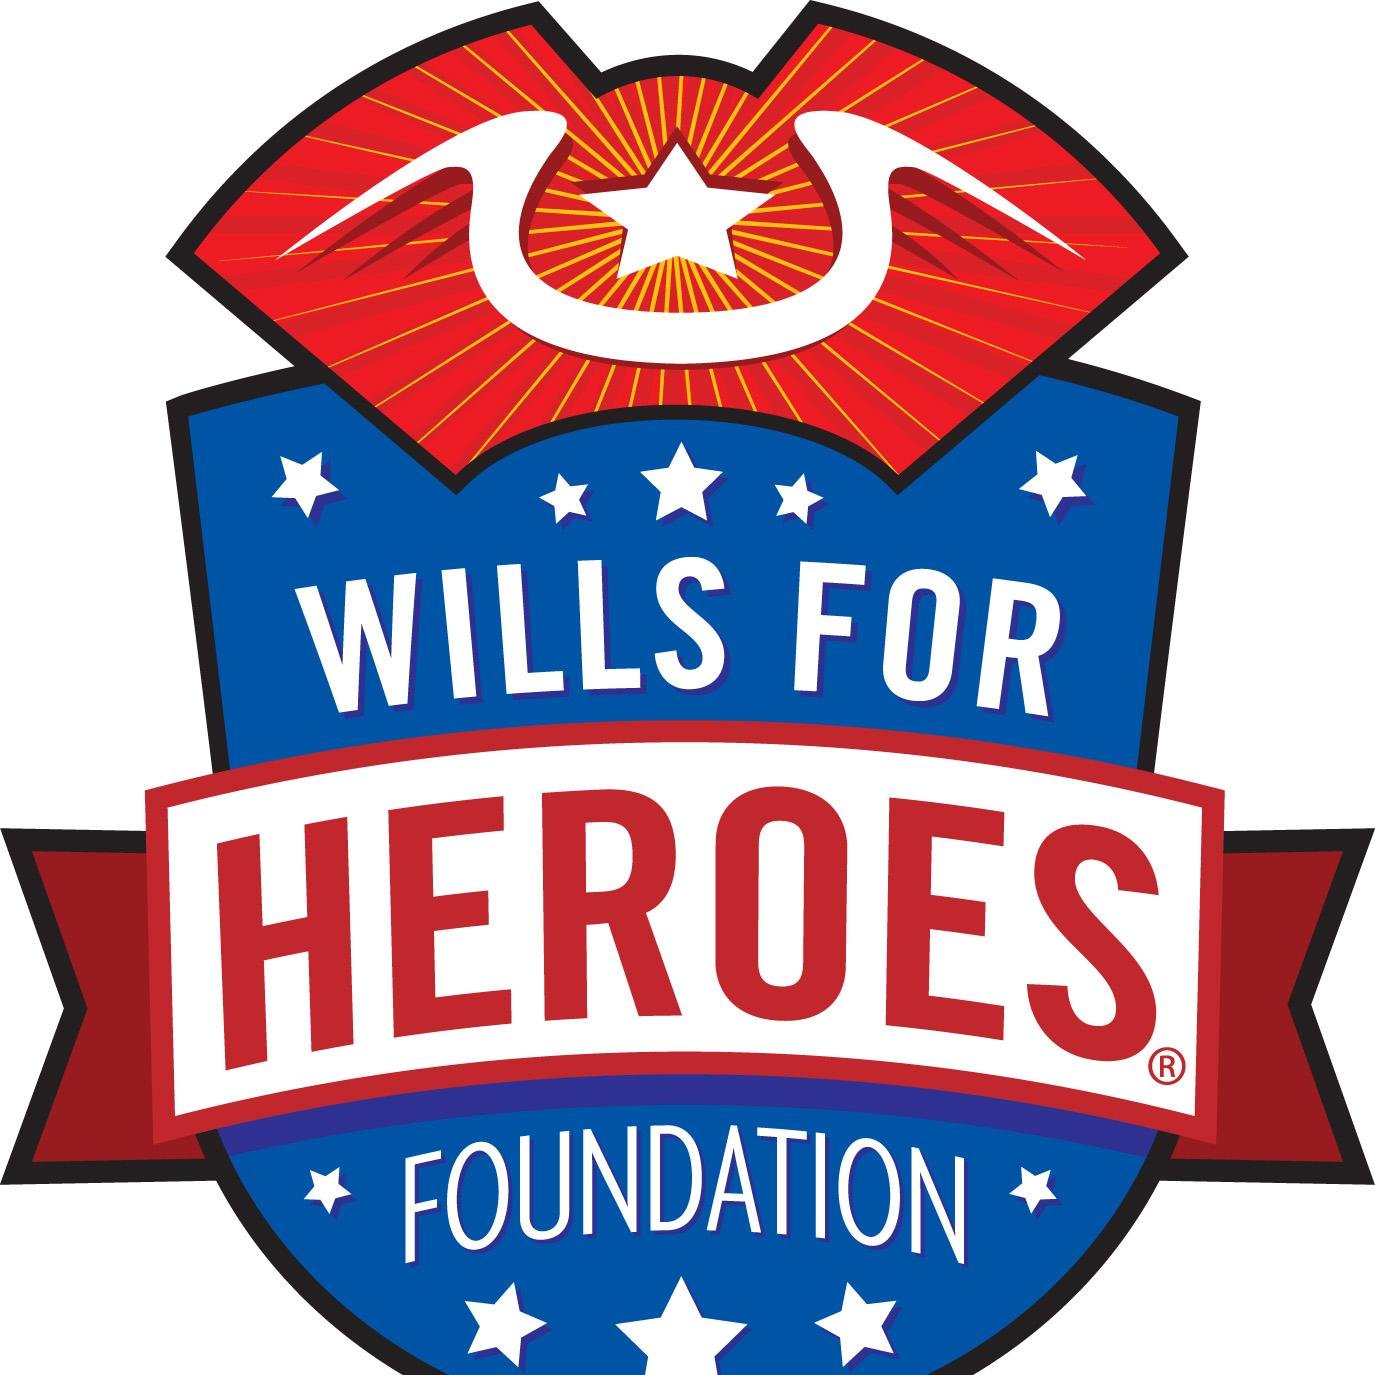 The Wills for Heroes program provides FREE wills, living wills, & powers of attorney to America's first responders & LEOs. Our 501(c)(3) supports these programs